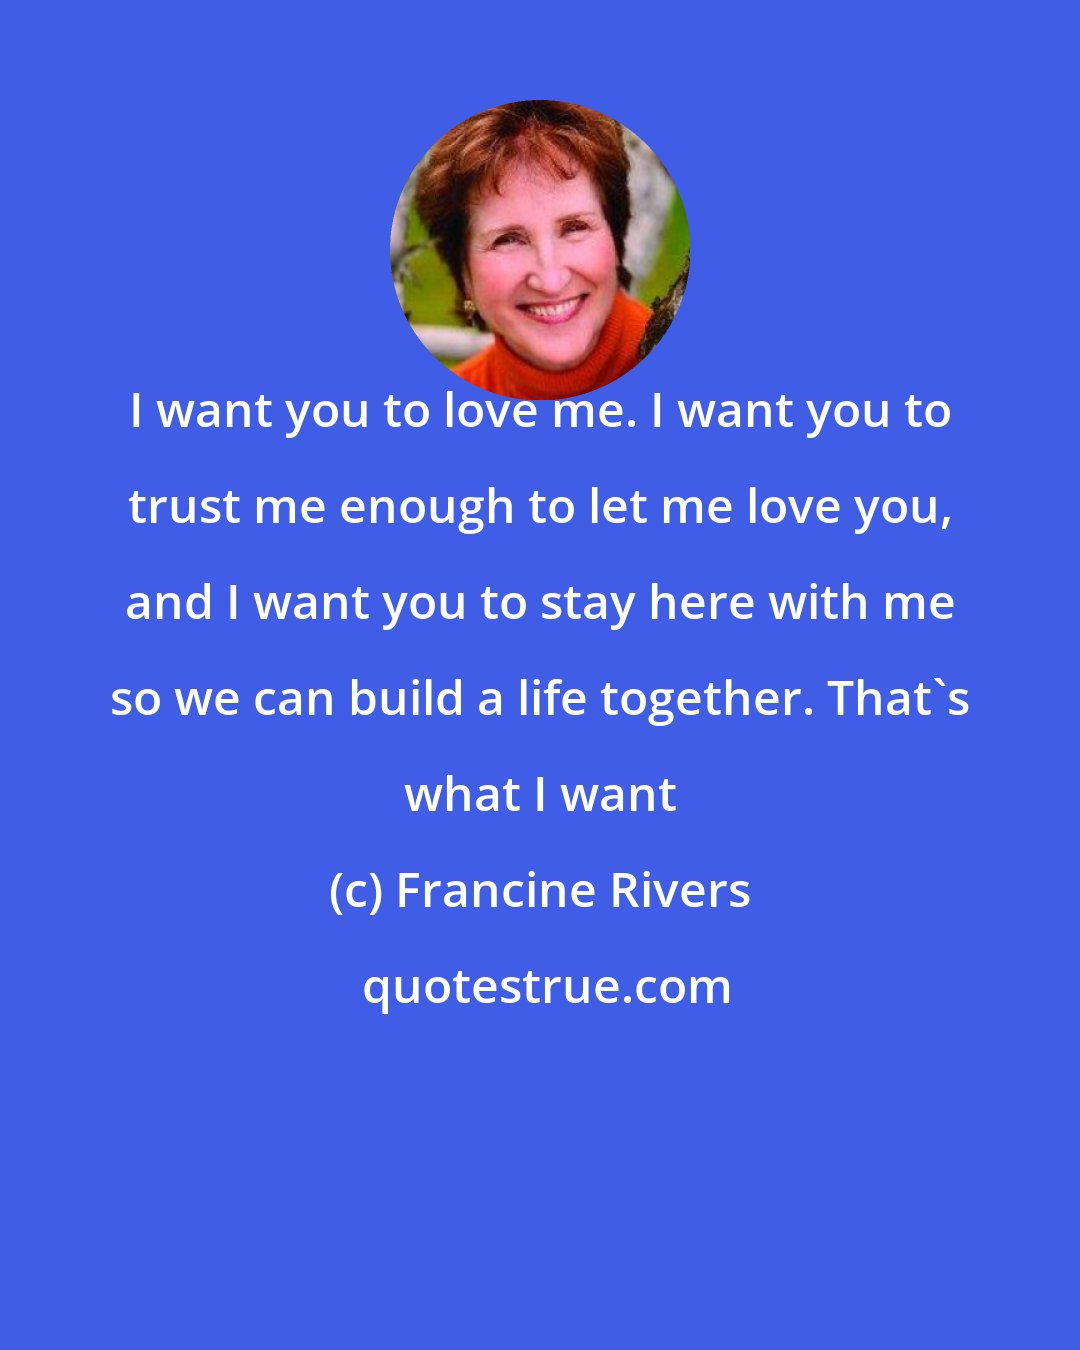 Francine Rivers: I want you to love me. I want you to trust me enough to let me love you, and I want you to stay here with me so we can build a life together. That's what I want